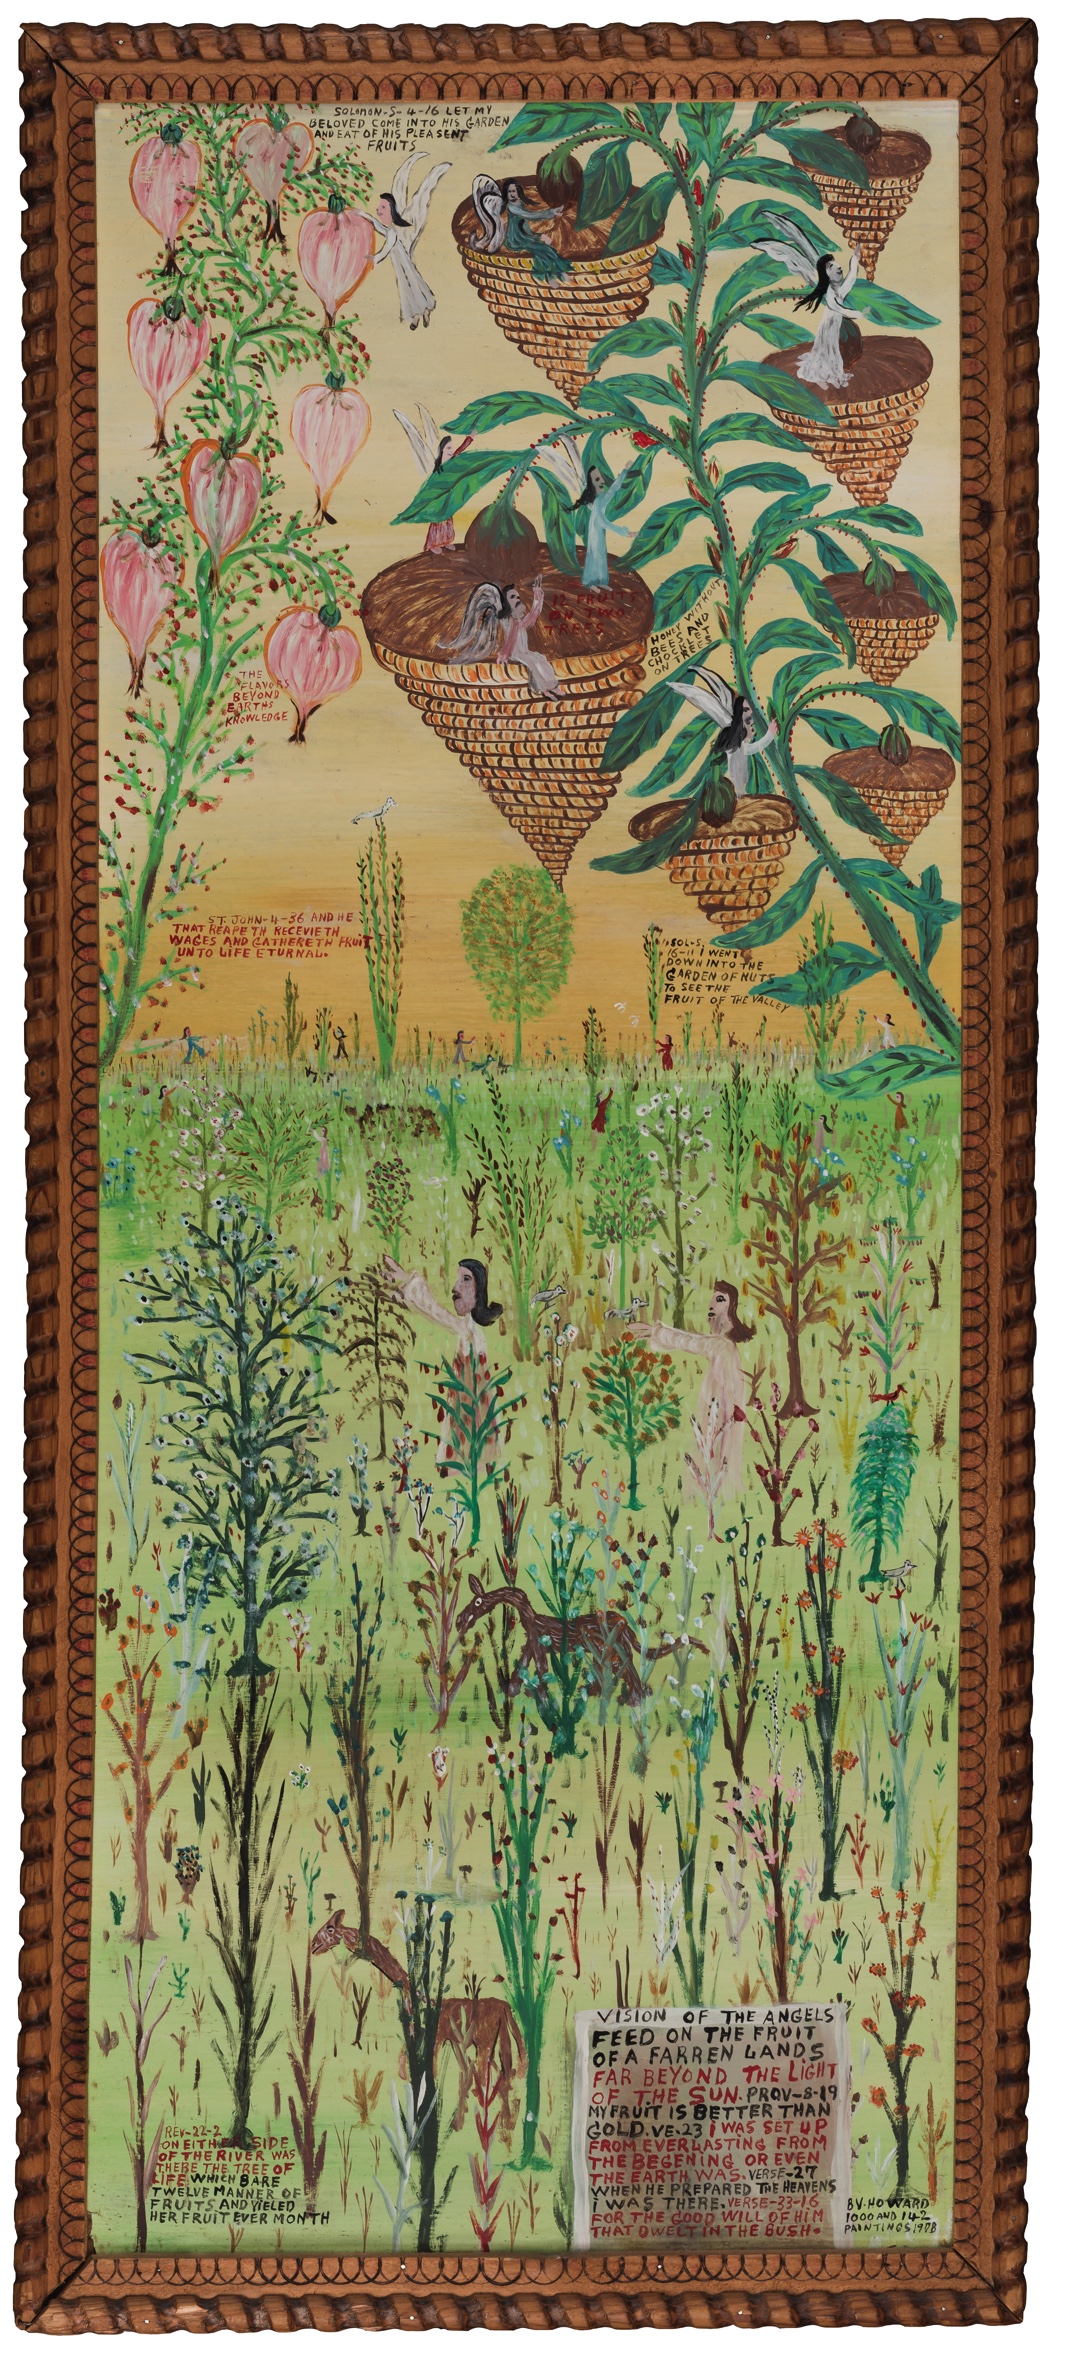 Howard Finster, Visions of the Angels – Honey Without Bees, 1978